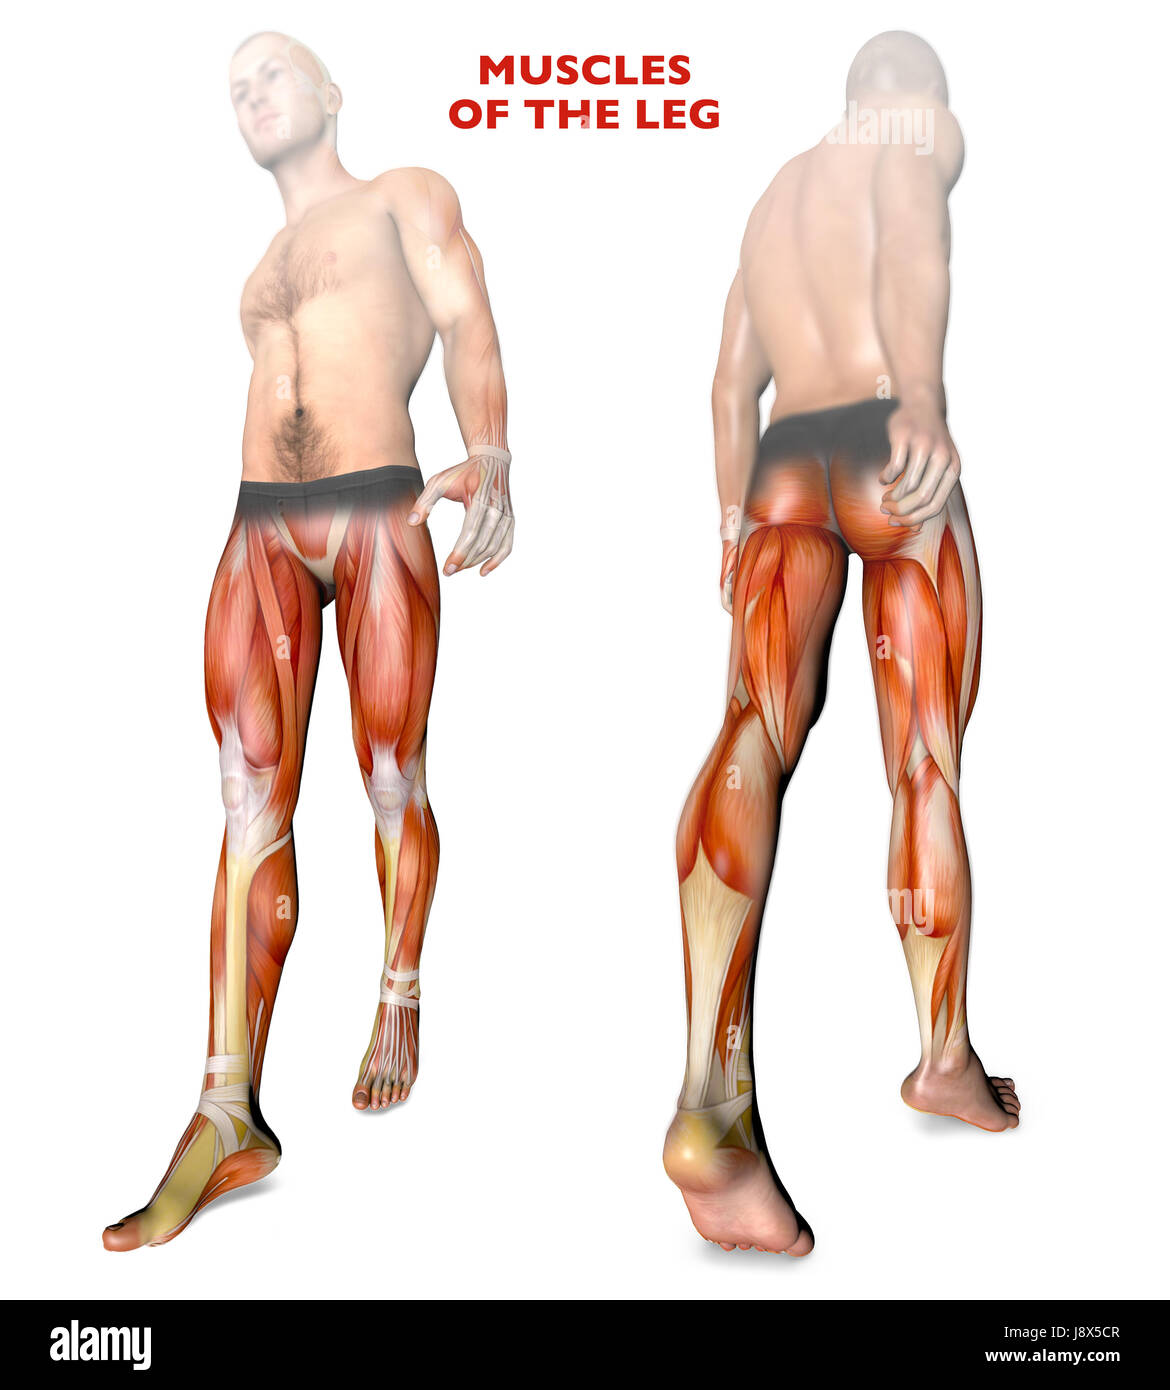 Leg muscles, human body, anatomy, muscle system. 3D rendering Stock Photo